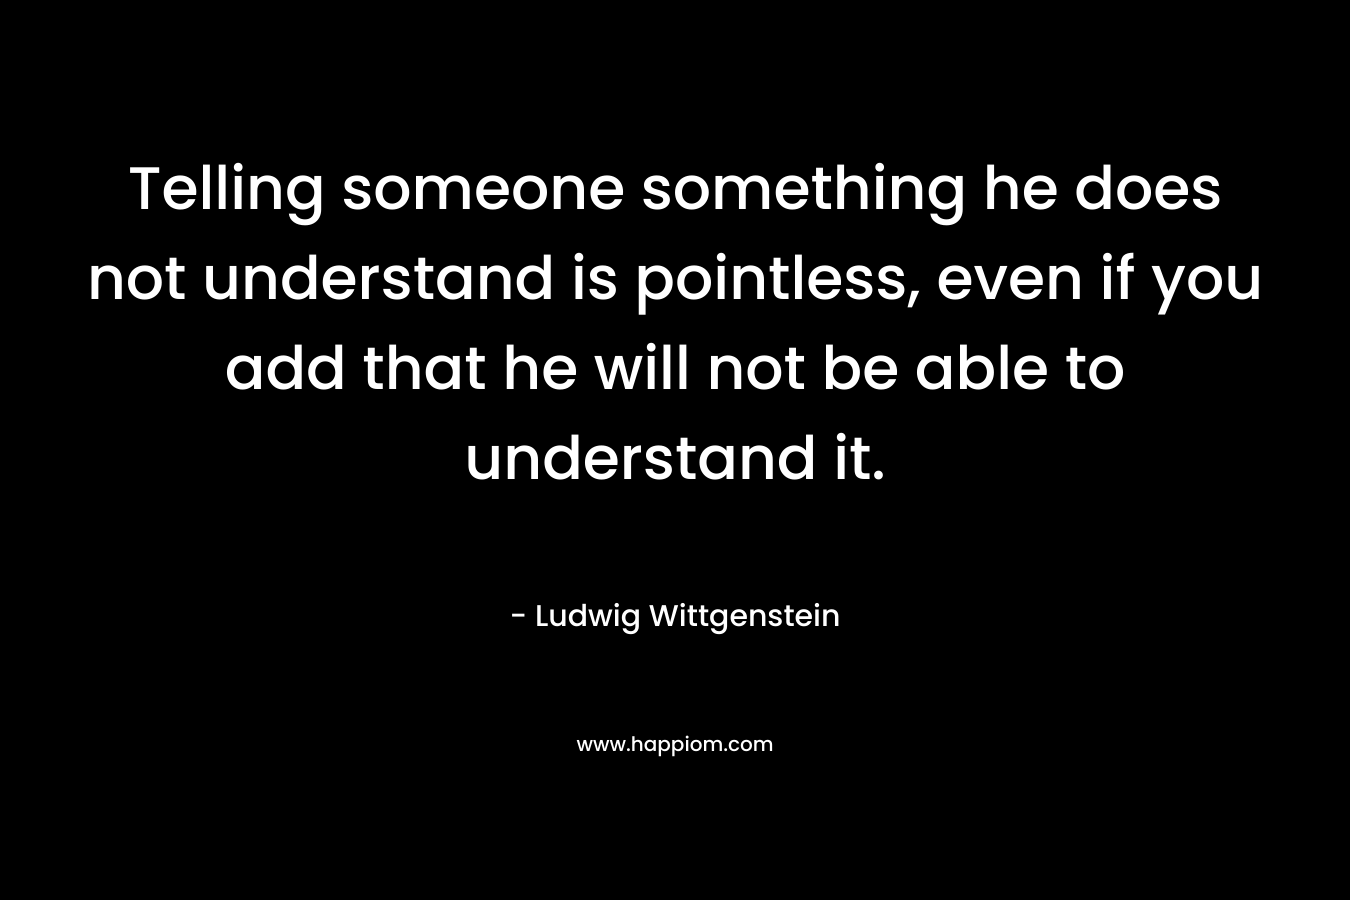 Telling someone something he does not understand is pointless, even if you add that he will not be able to understand it.